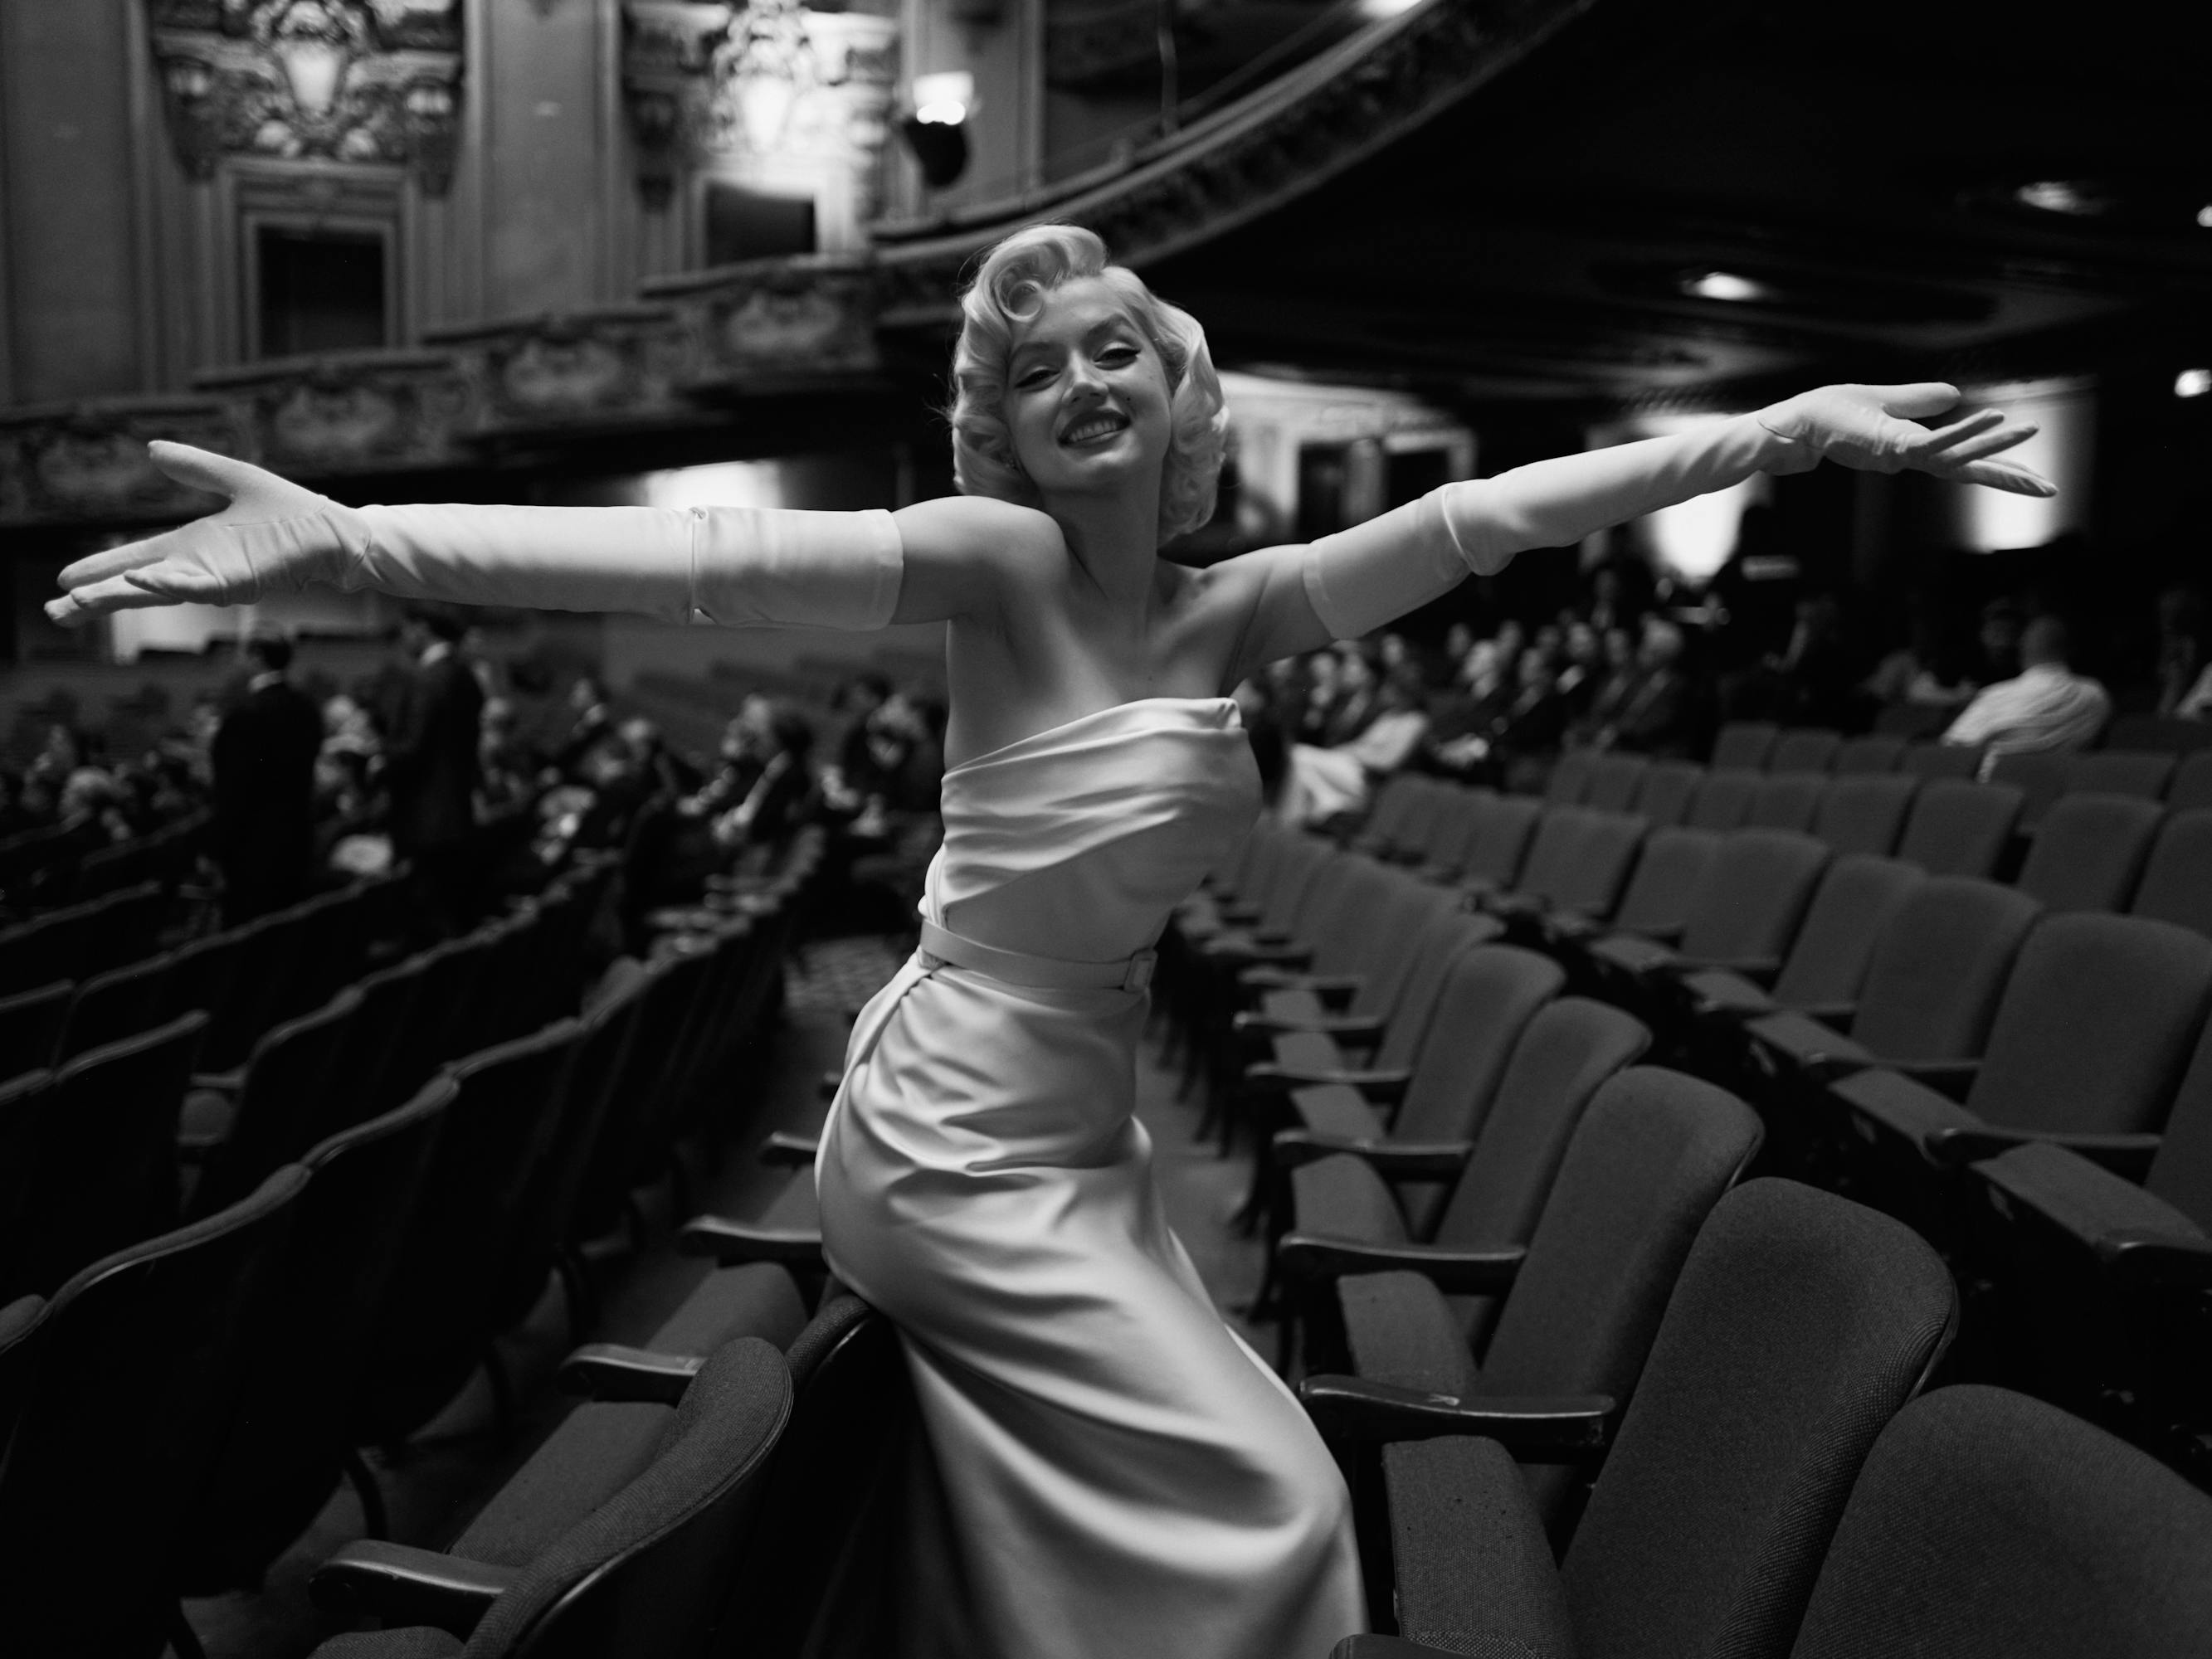 Marilyn Monroe (Ana de Armas) wears a satin dress and gloves and stands in an empty theater smiling.